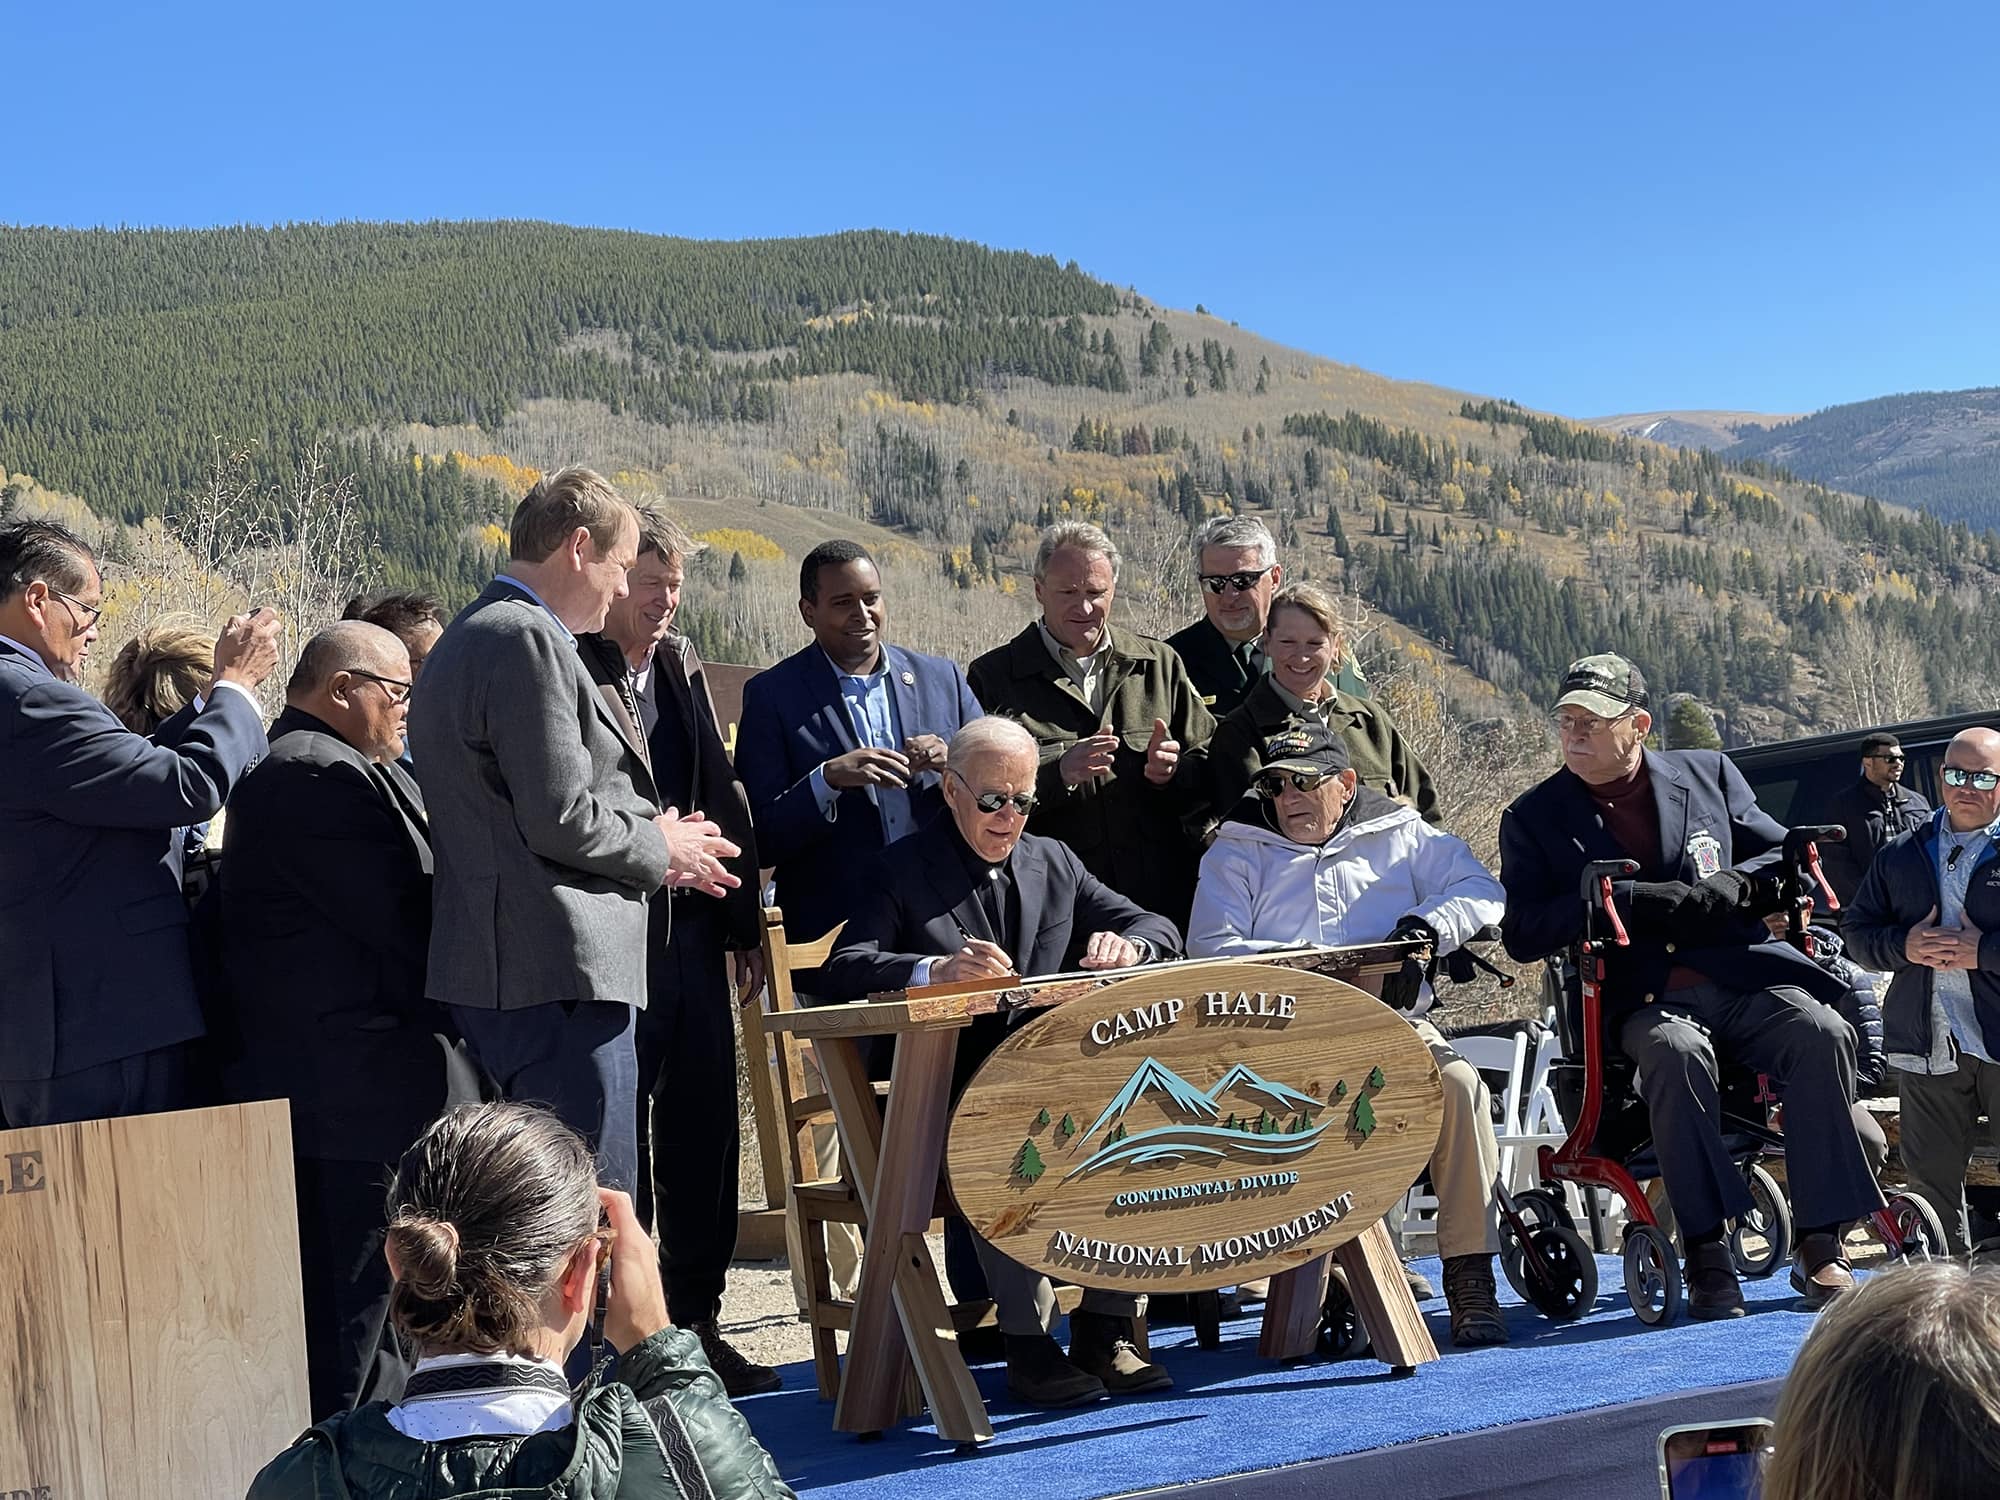 President Biden signing the Camp Hale–Continental Divide National Monument